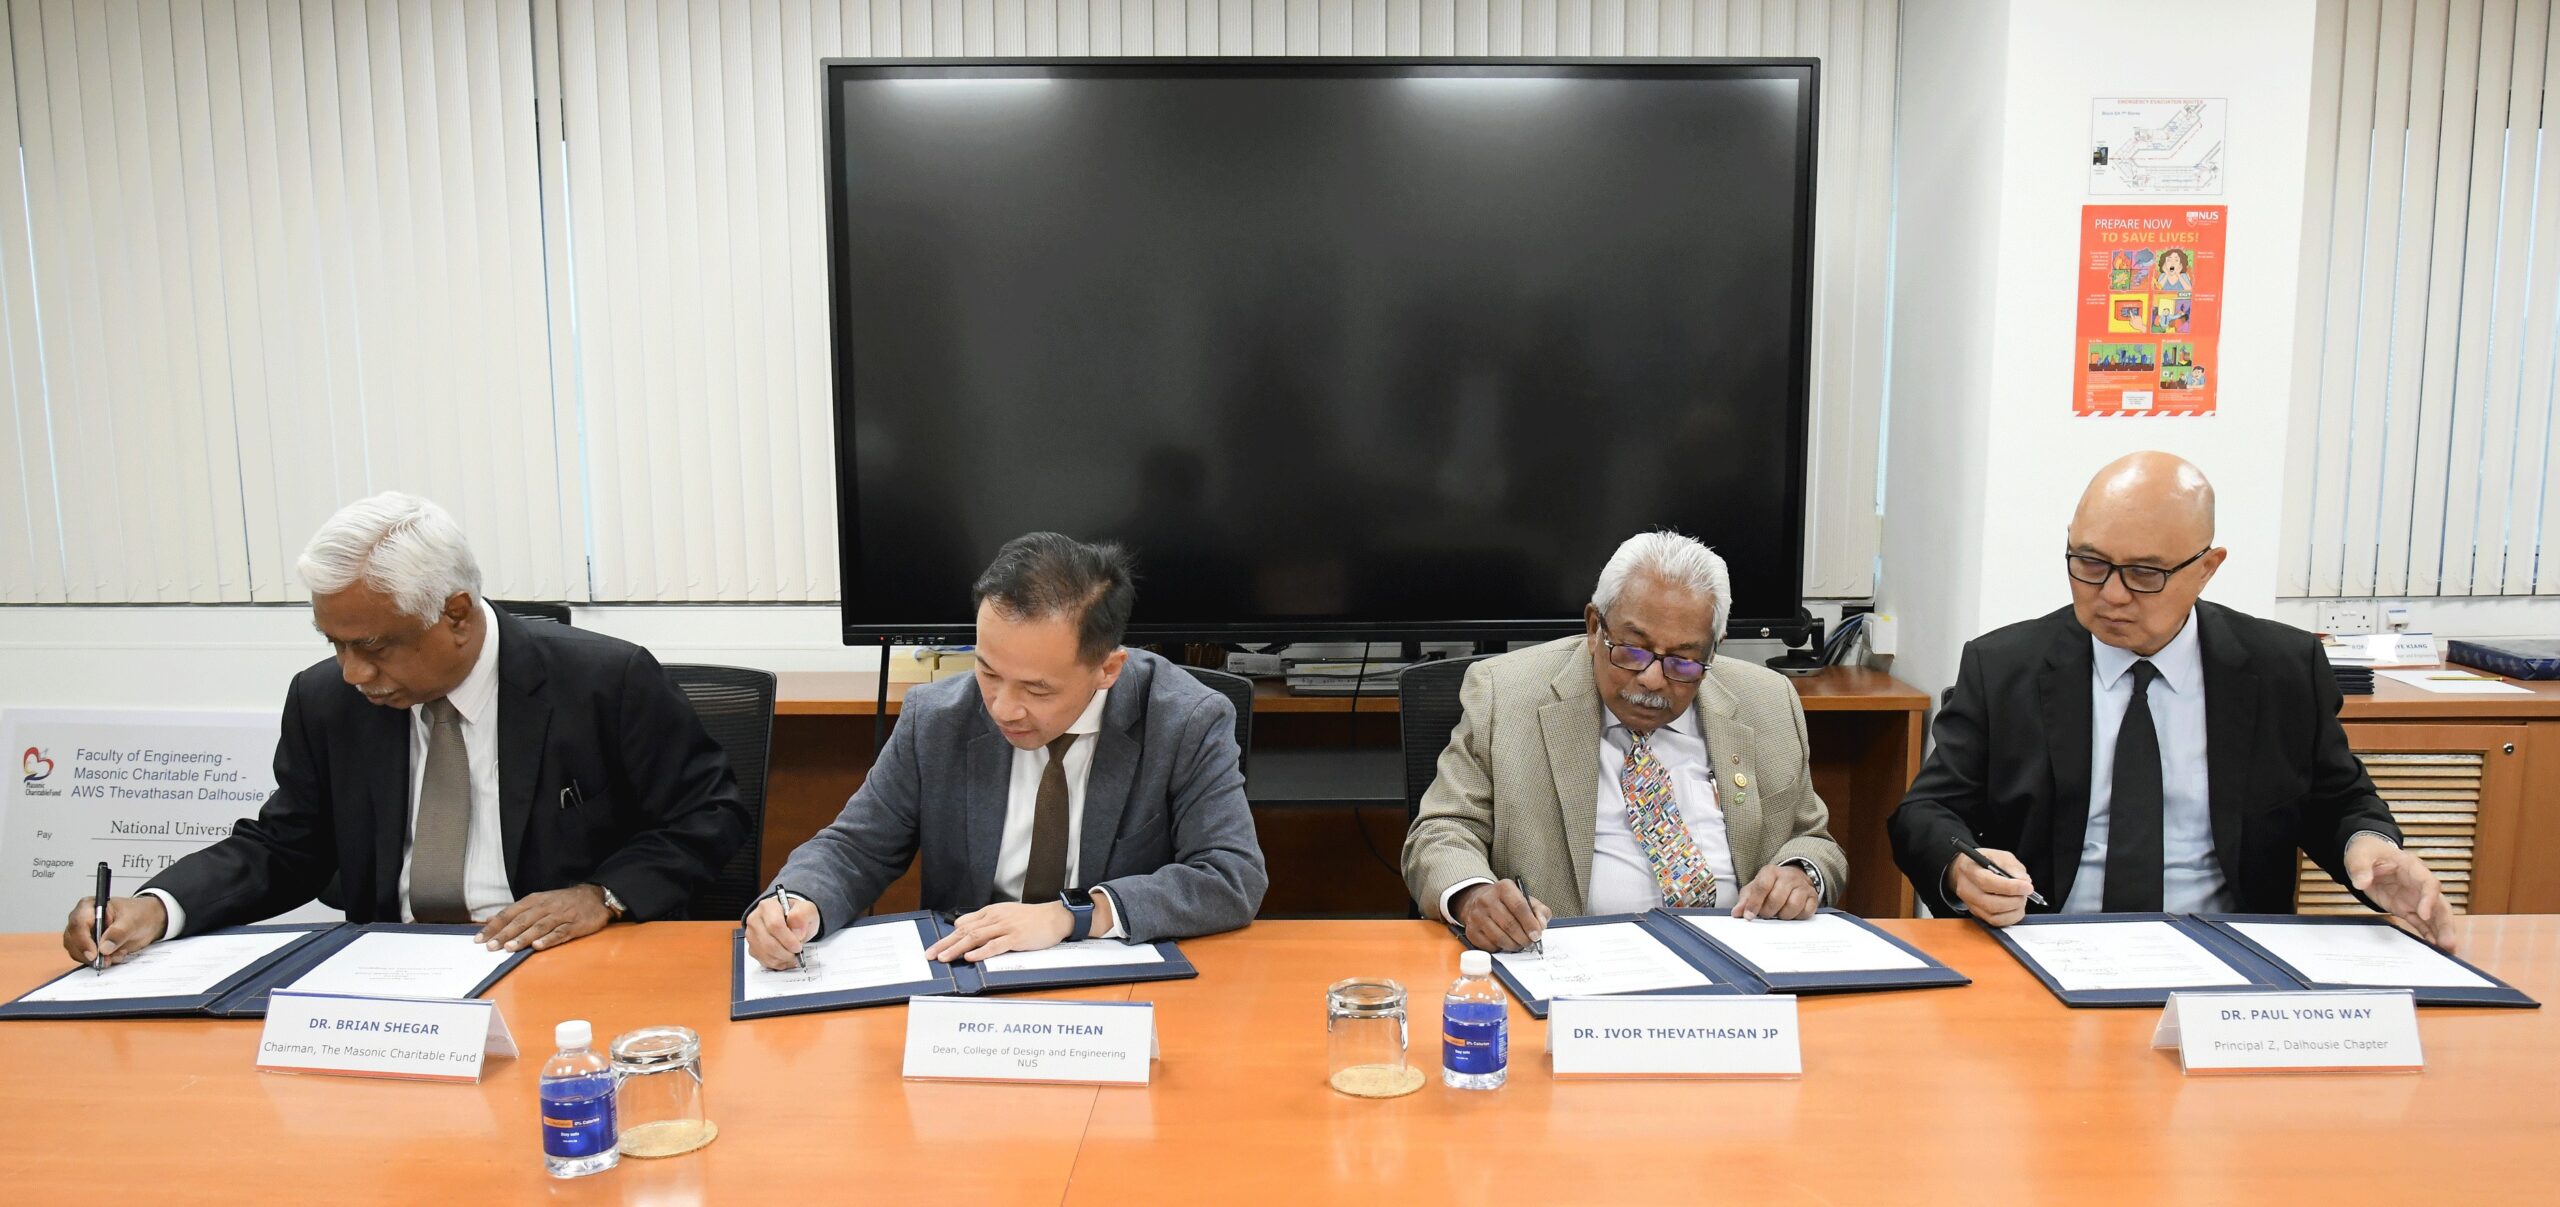 The second gift agreement was signed by Dr Brian Shegar, Chairman of MCF, CDE Dean Prof Aaron Thean, Dr Ivor Thevathasan and Mr Paul Yong Way, Principal Z of Dalhousie Chapter.